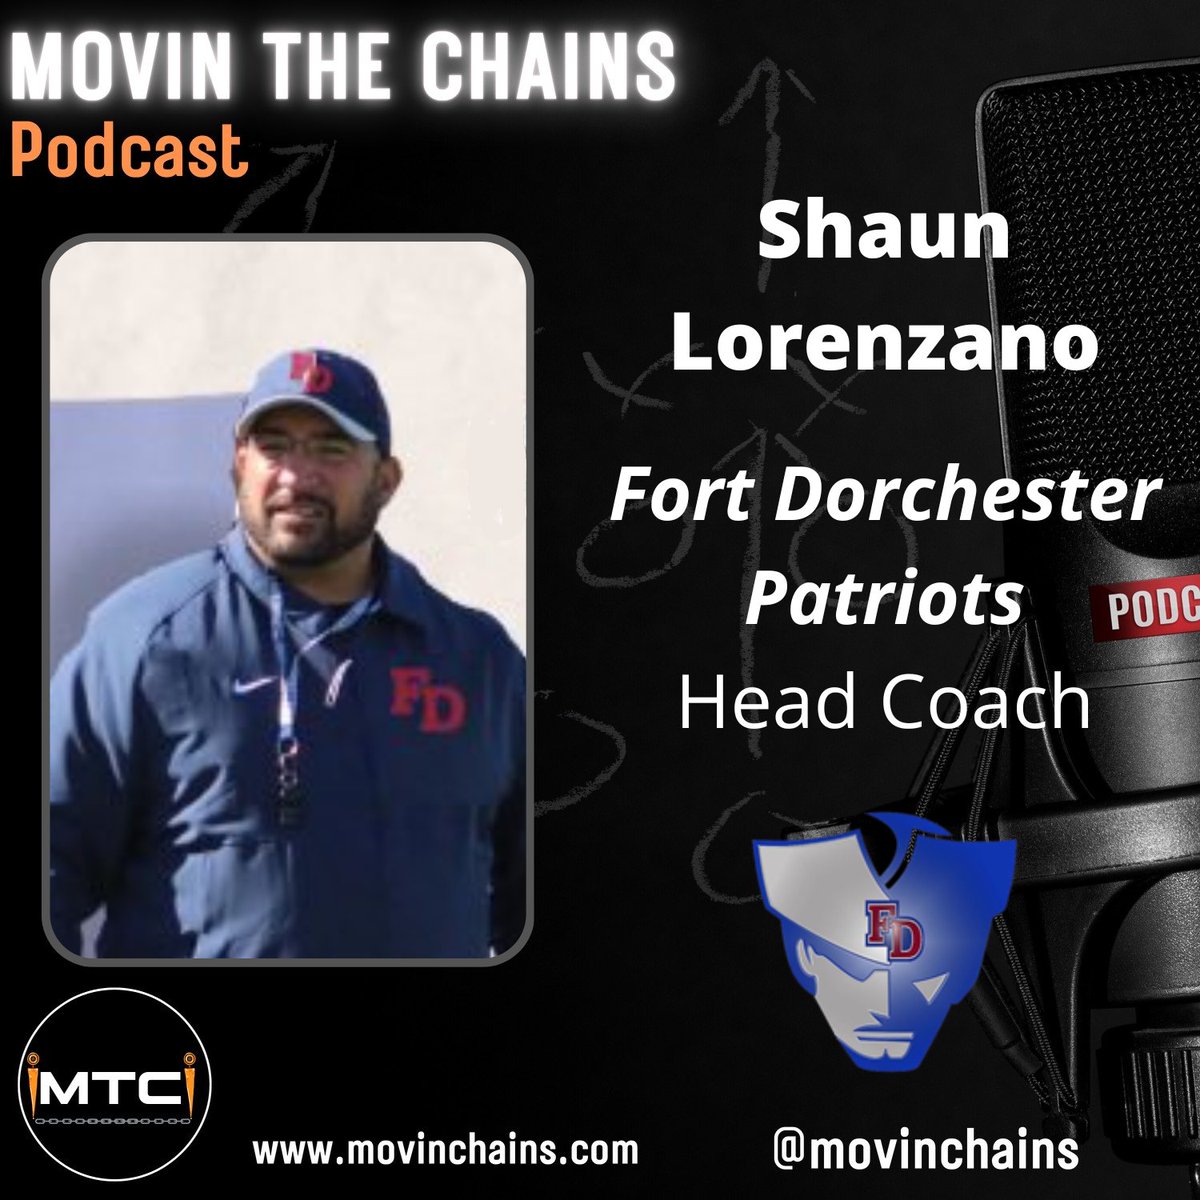 🎙️SHAUN LORENZANO, FORT DORCHESTER PATRIOTS' NEW HC - EXCLUSIVE INTERVIEW WITH MTC

🏈@coachlorenzano gives an exclusive look into the future of the @FDpatriots, his career and style, playmakers, & more!
#schsfb #FORTHITS

🗓️TUESDAY @7p on Facebook & YouTube 🎥📺
⬇️
🔗LINK IN BIO